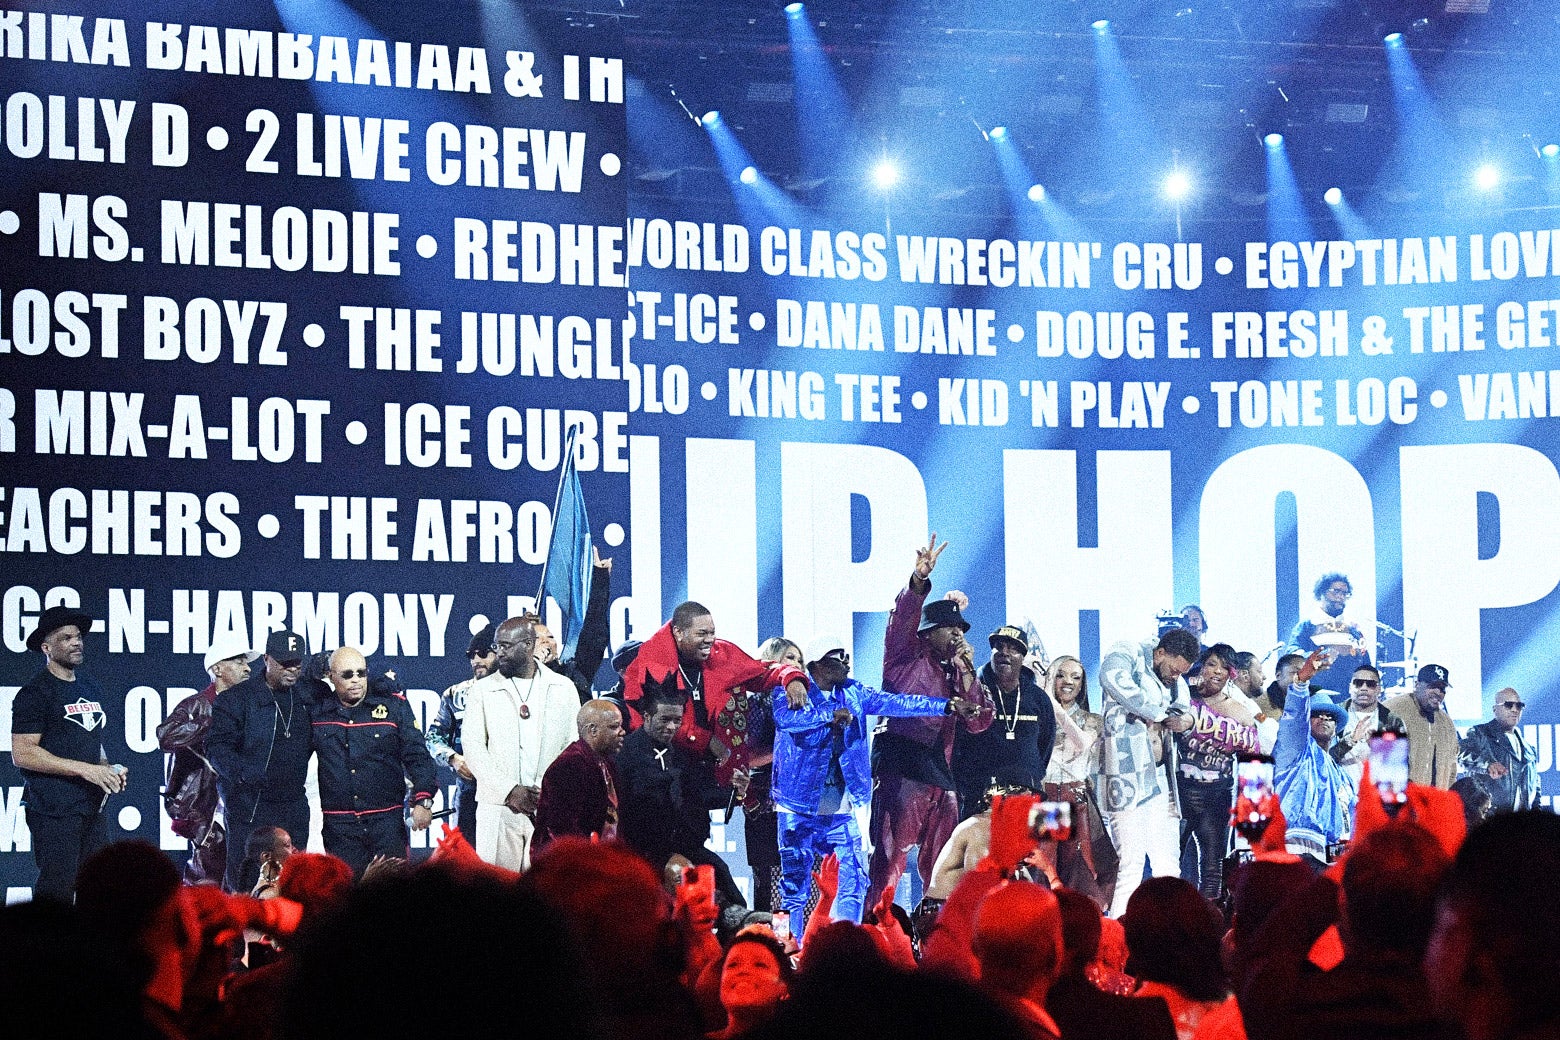 A crew of 15 to 20 rappers beget onstage, with the names of hip-hop legends within the background.